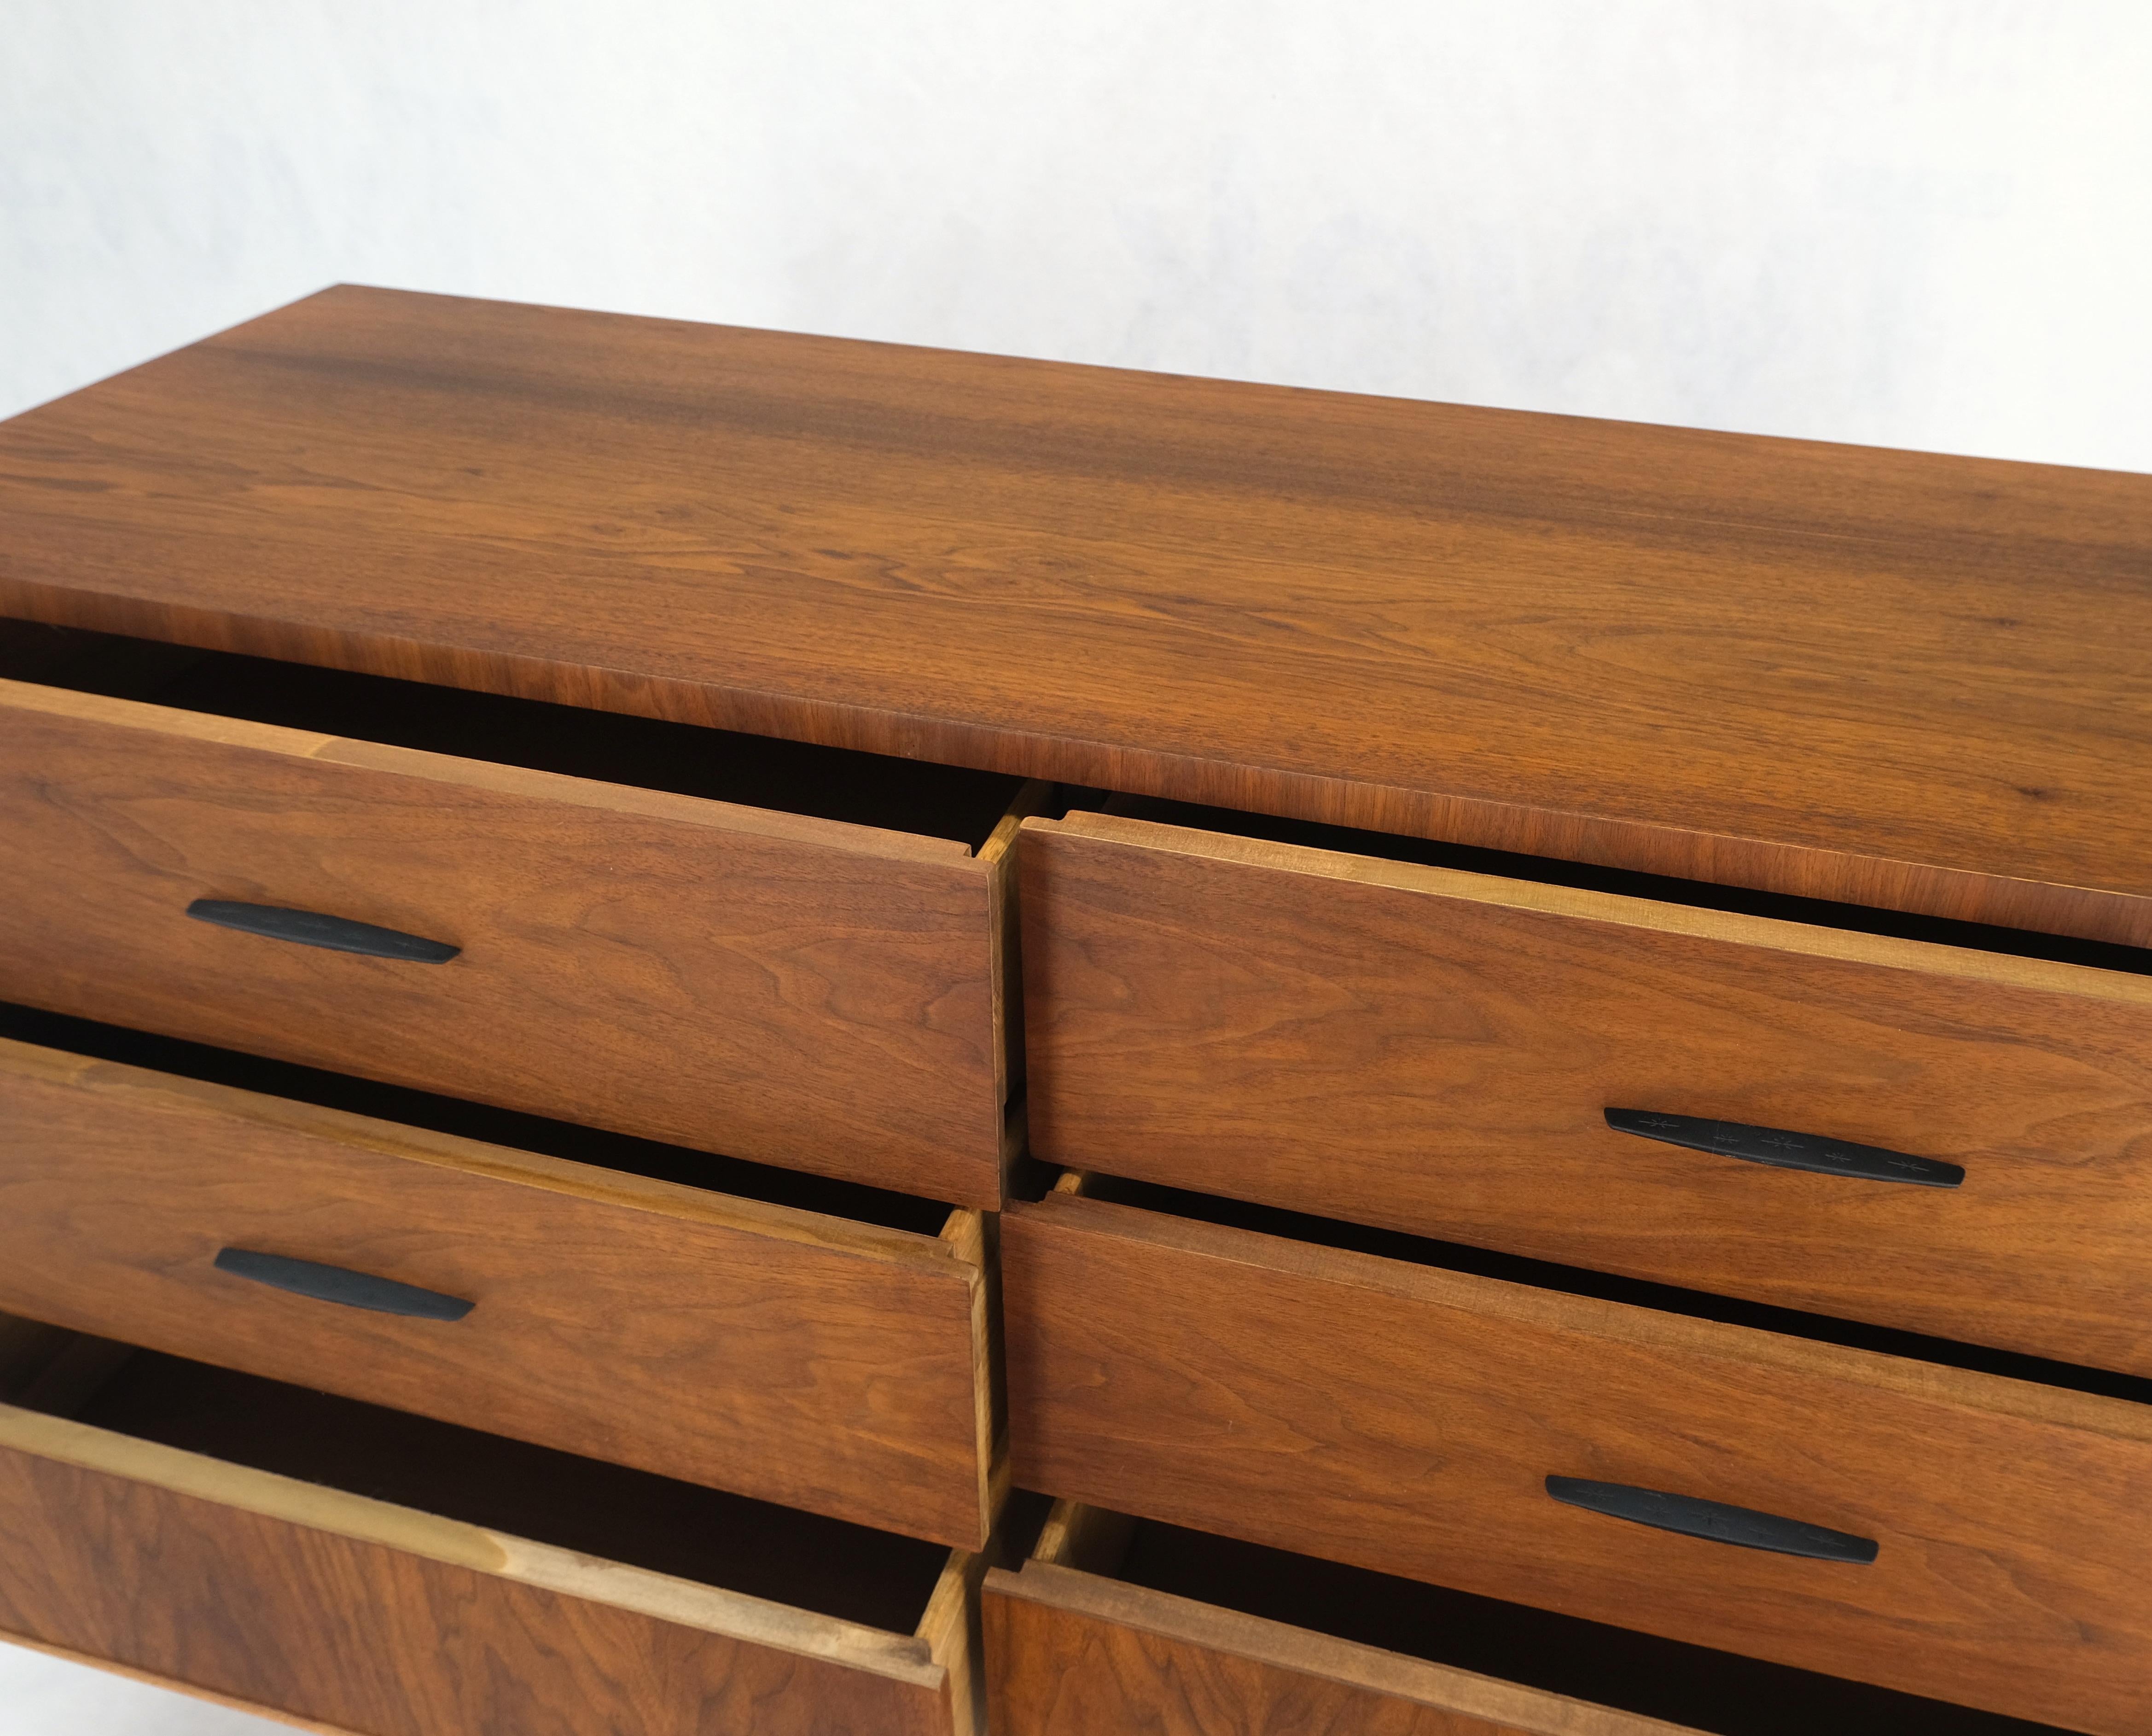 20th Century American Walnut Compact Mid-Century Modern Double Dresser 6 Drawers Mint For Sale